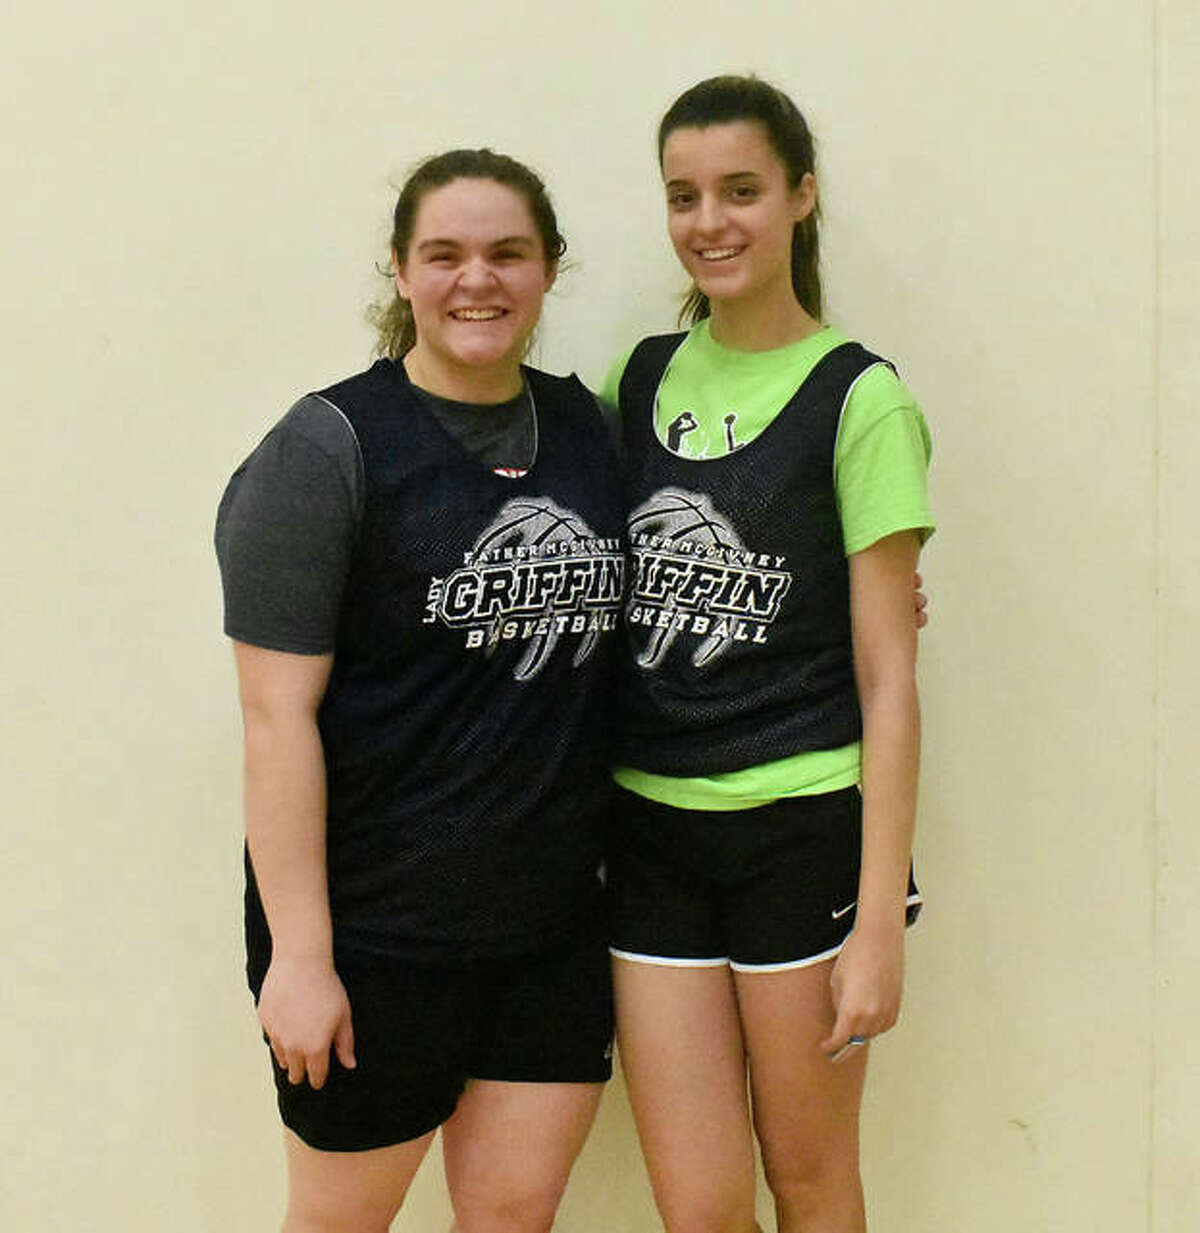 Father McGivney seniors for the girls’ basketball team include Caitlyn Pendall, left, and Nicole Luchetti.